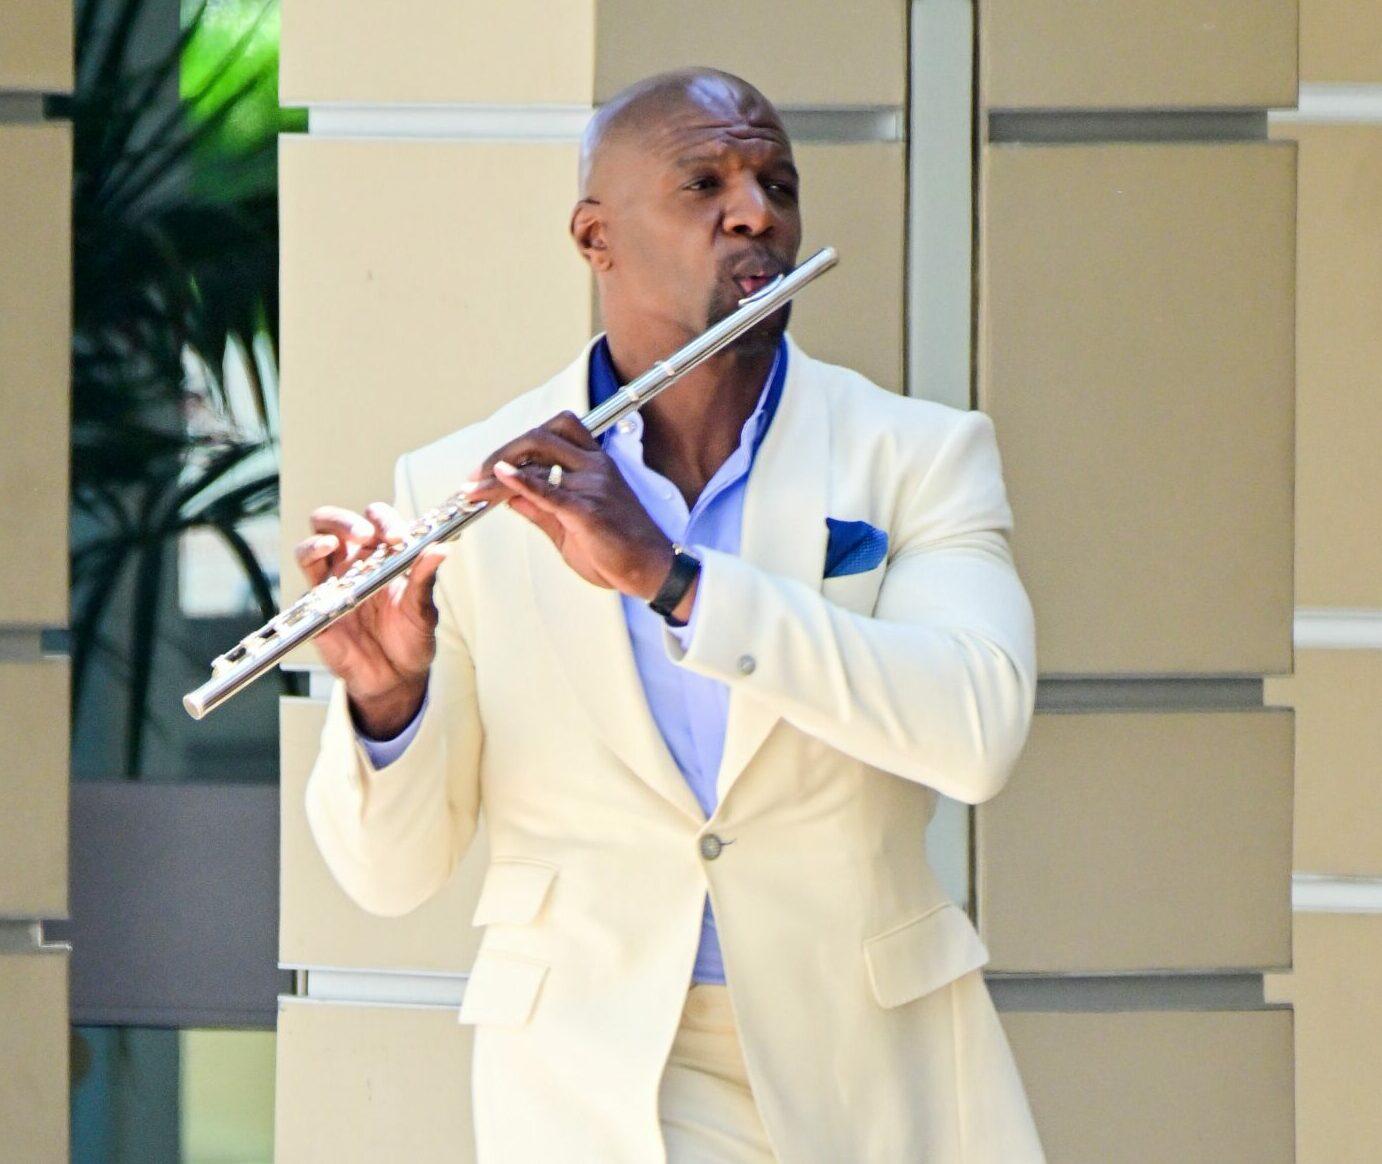 Terry Crews has the time of his life as he plays the flute while filming a scene for America's Got Talent in Pasadena